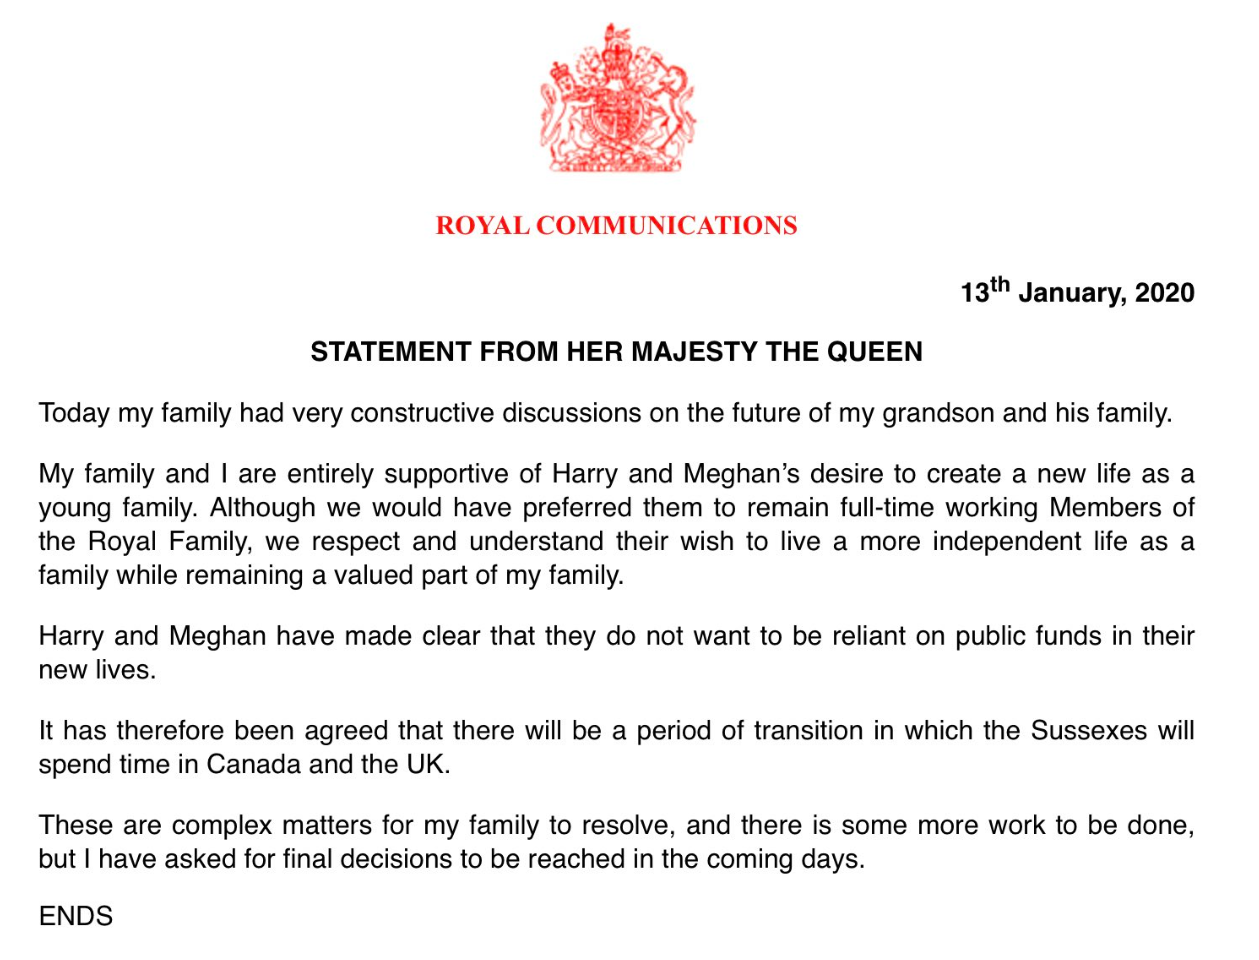 The Queen released a statement